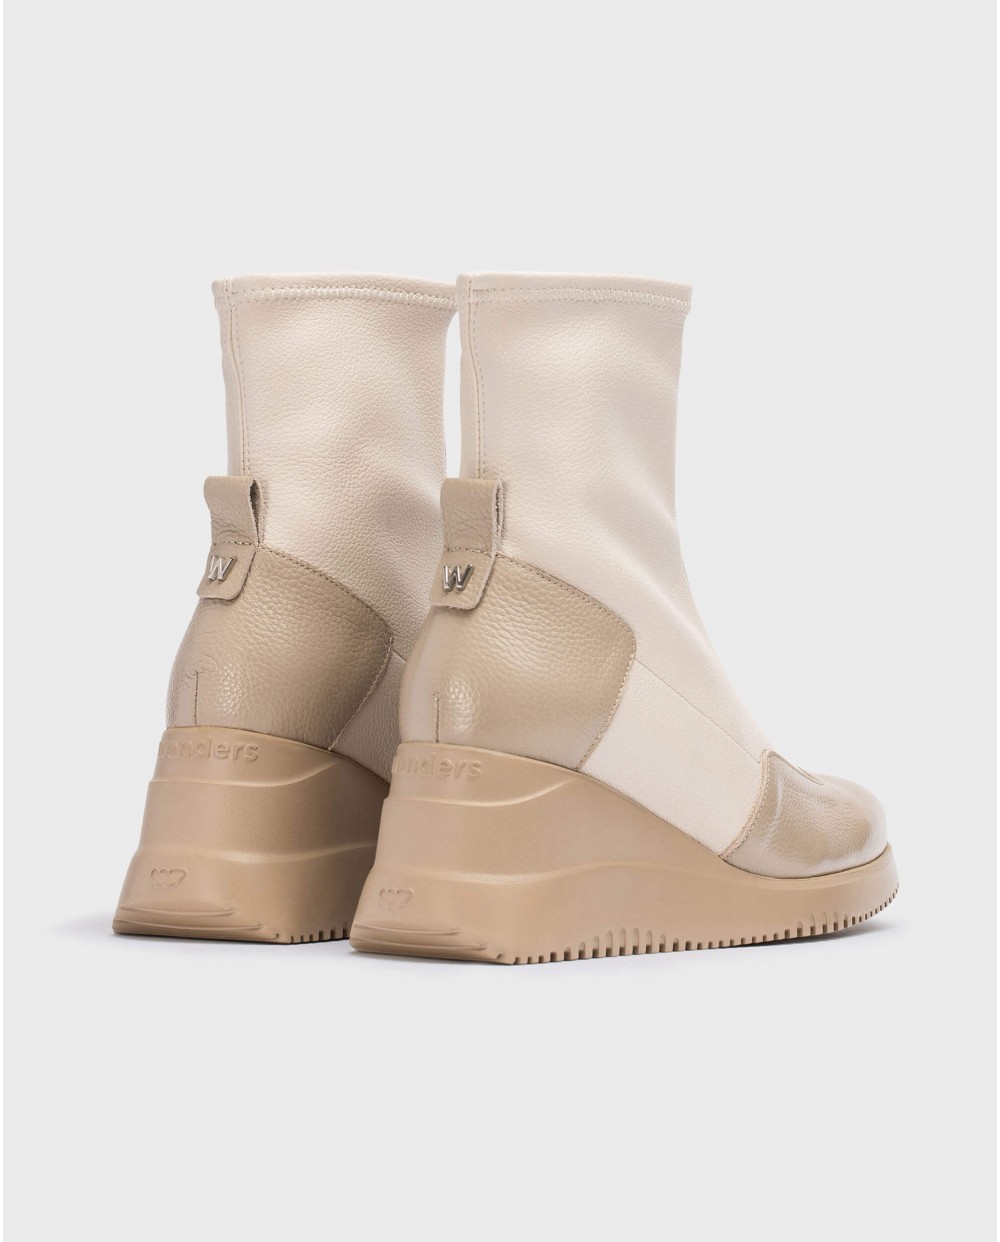 Wonders-Ankle Boots-Beige INDIA ankle boot